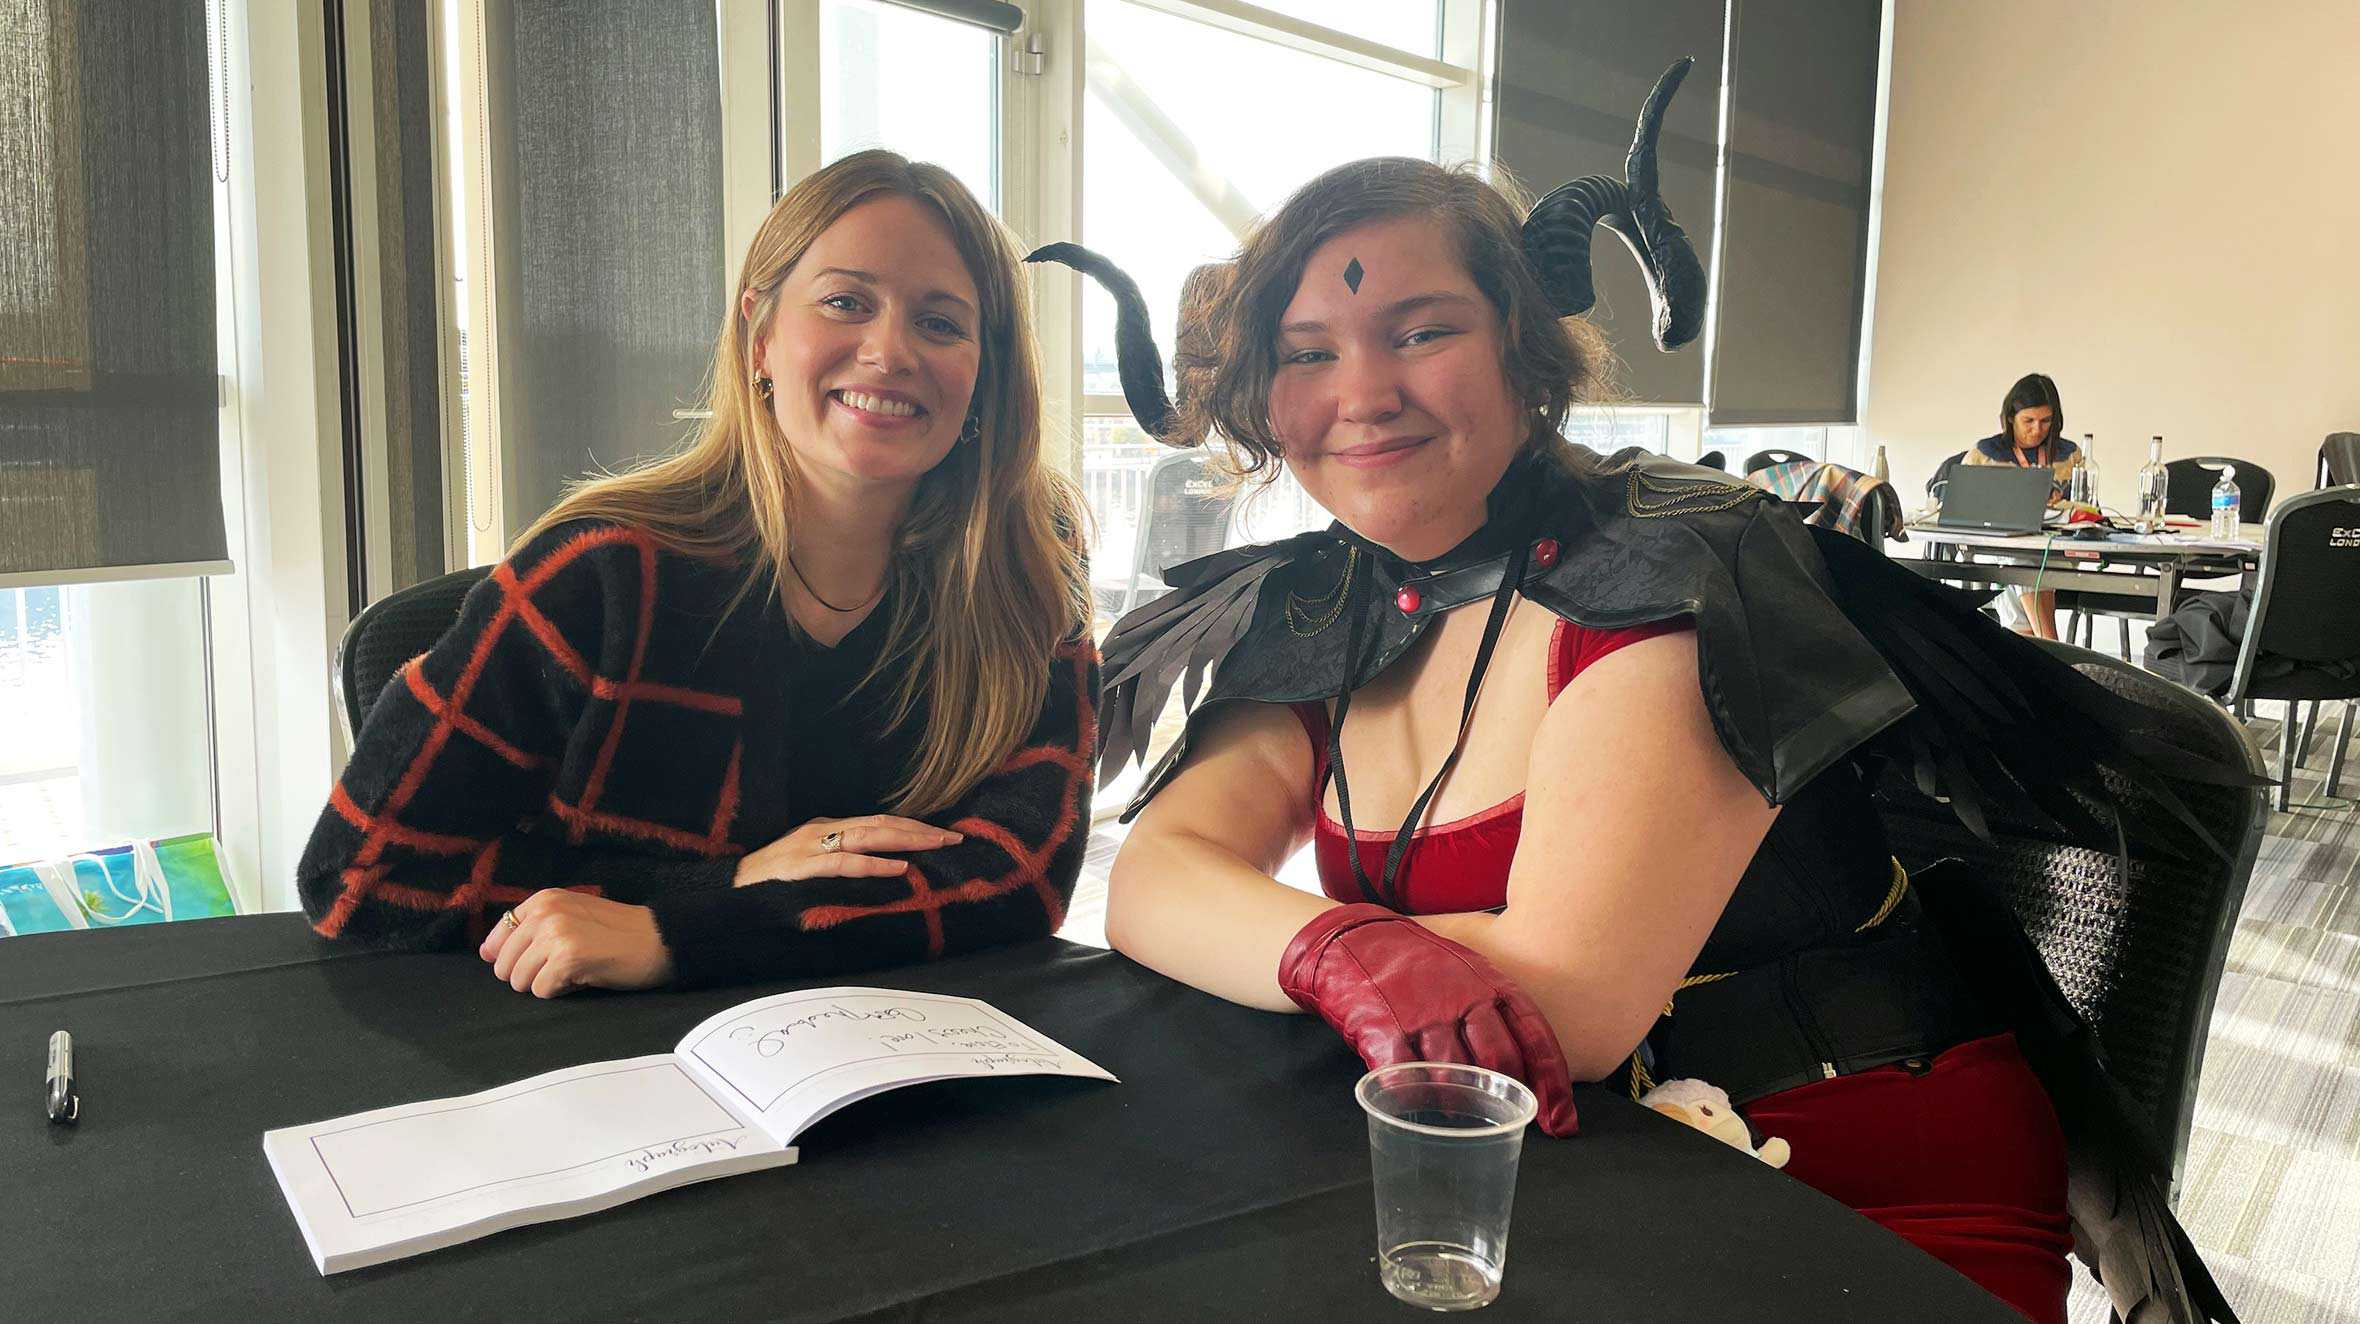 Elsie with actor, Cara Theobold, who voiced a character in the video game Overwatch